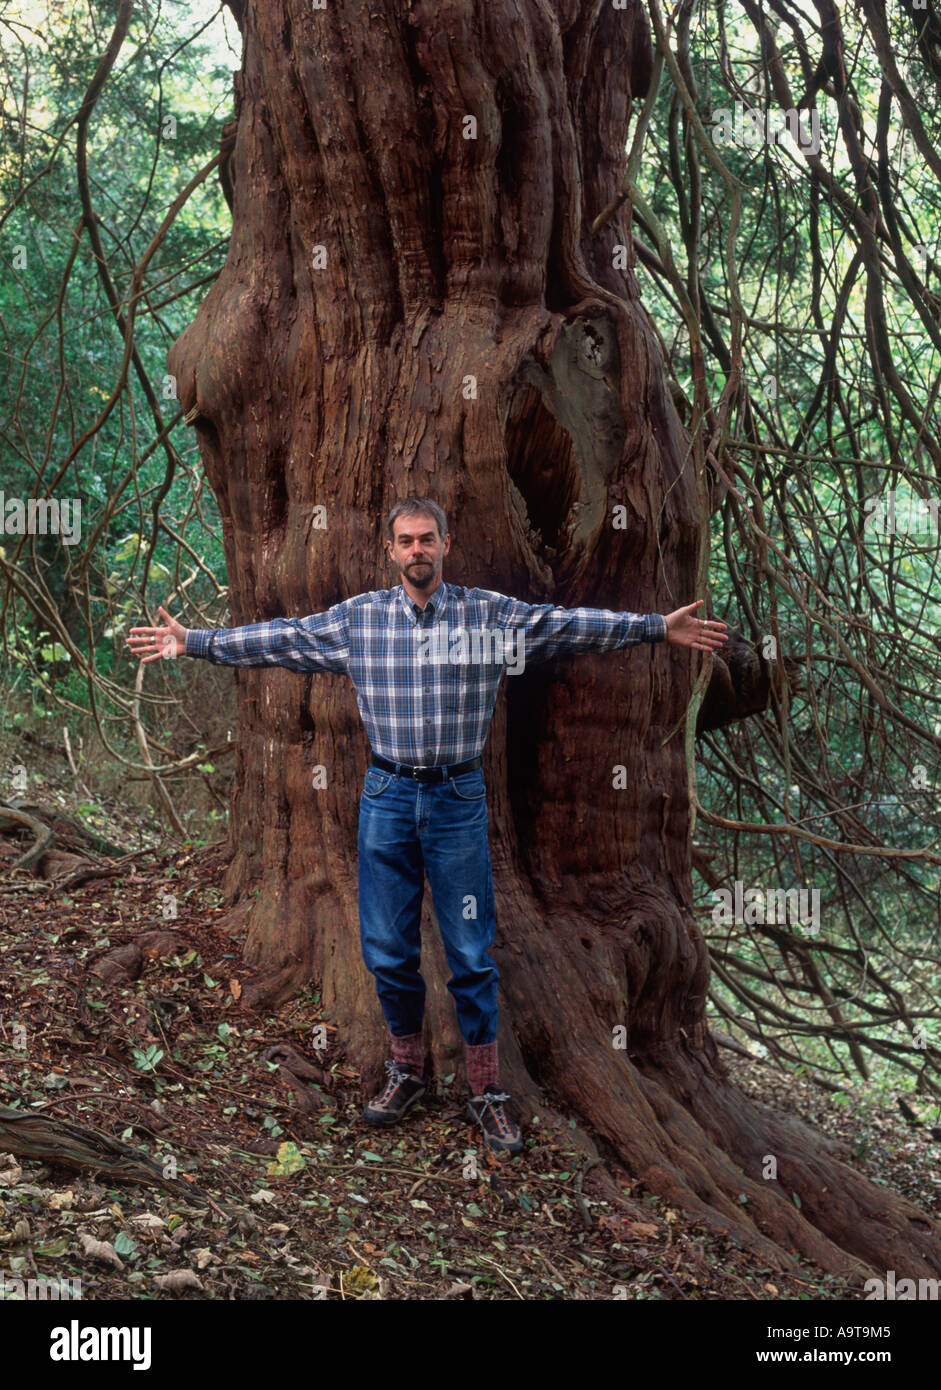 Man with outstretched arms standing before 2000 year old yew tree (Taxus baccata), Druid's Grove, Norbury Park, Surrey, England Stock Photo